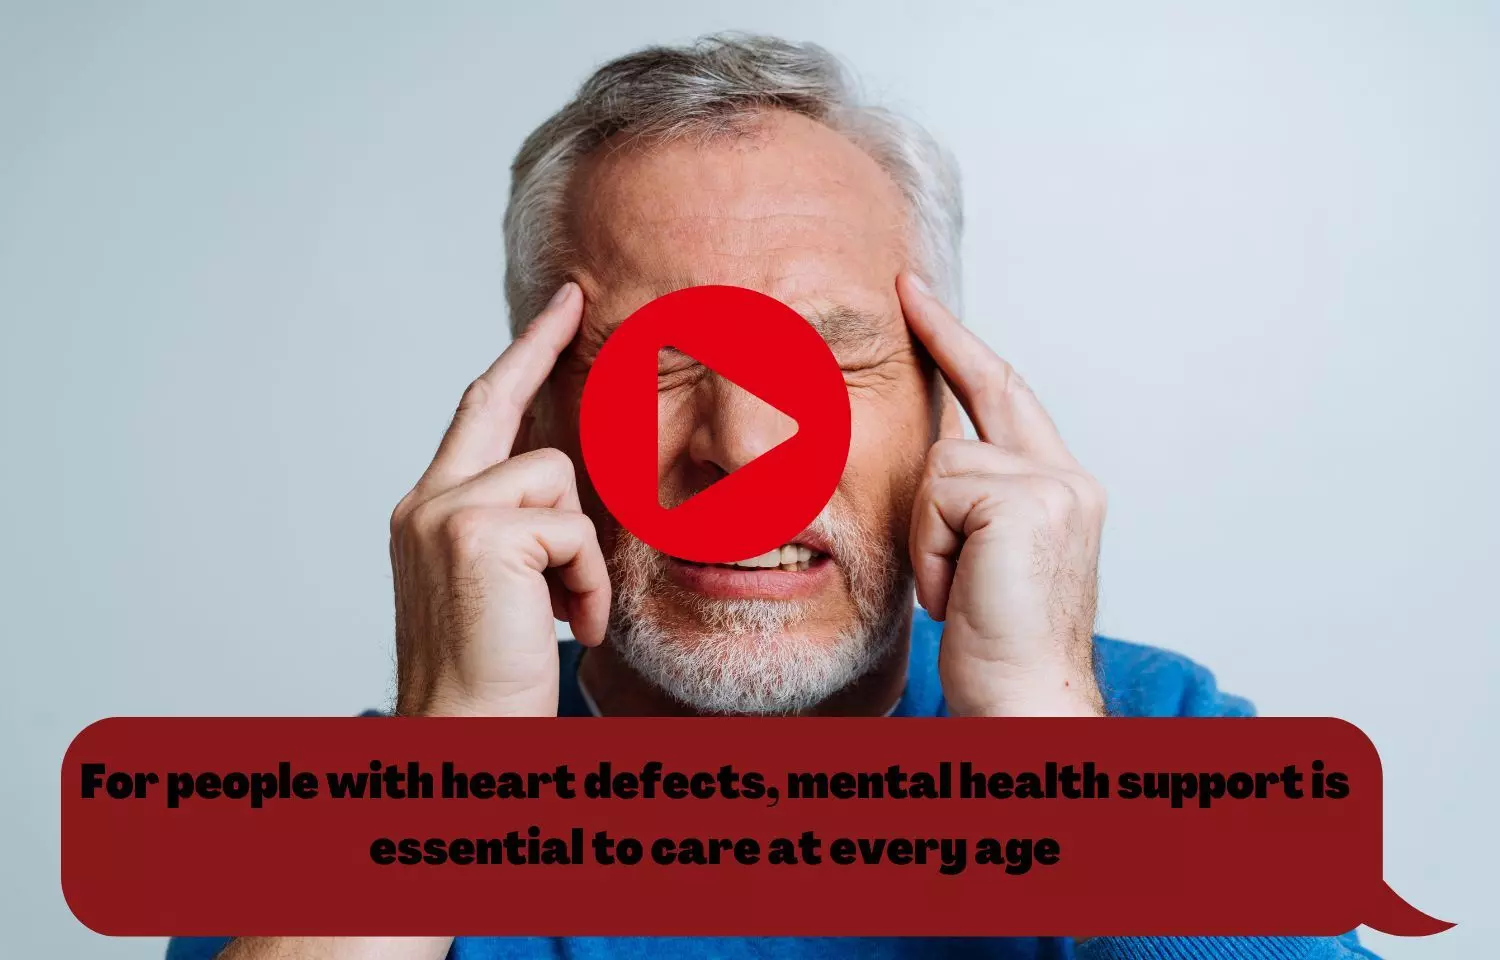 For people with heart defects, mental health support is essential to care at every age